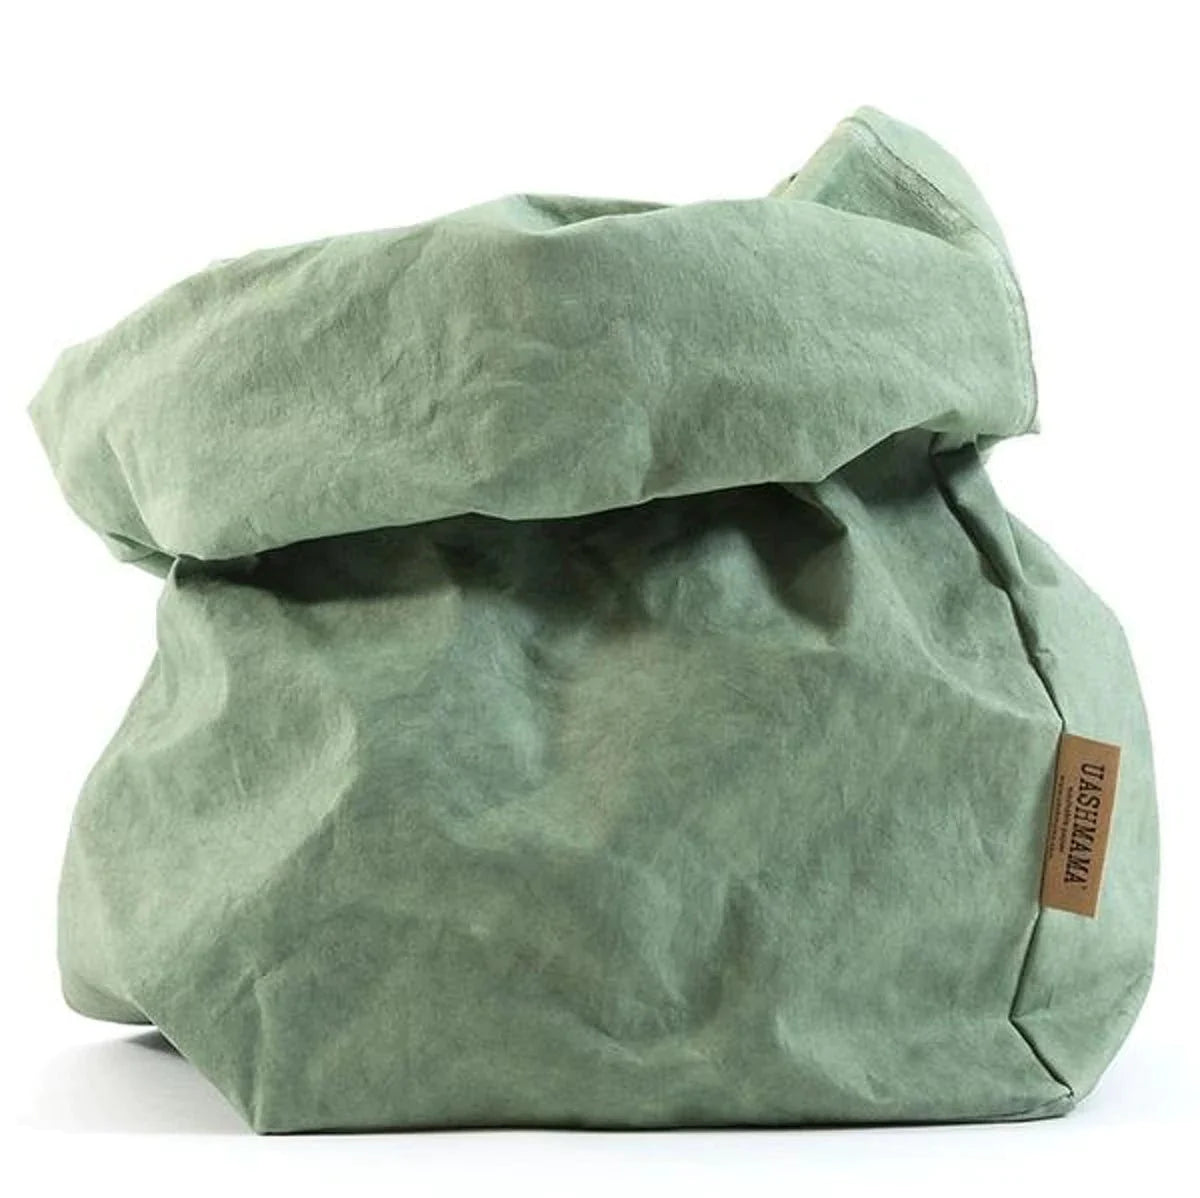 A washable paper bag is shown. The bag is rolled down at the top and features a UASHMAMA logo label on the bottom left corner. The bag pictured is the extra extra large size in green.